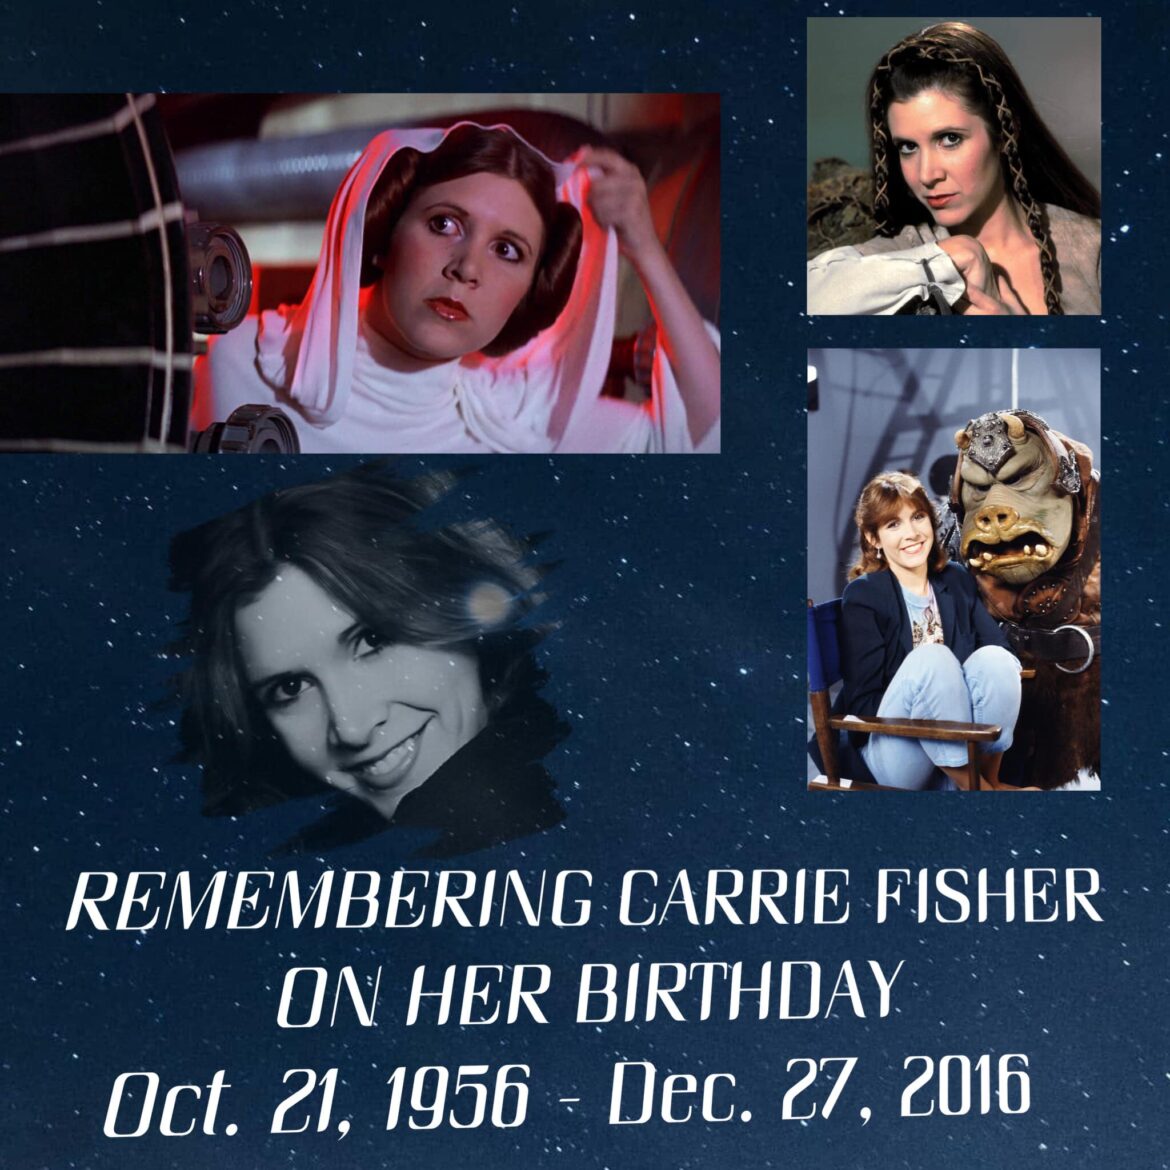 Happy Birthday Carrie Fisher